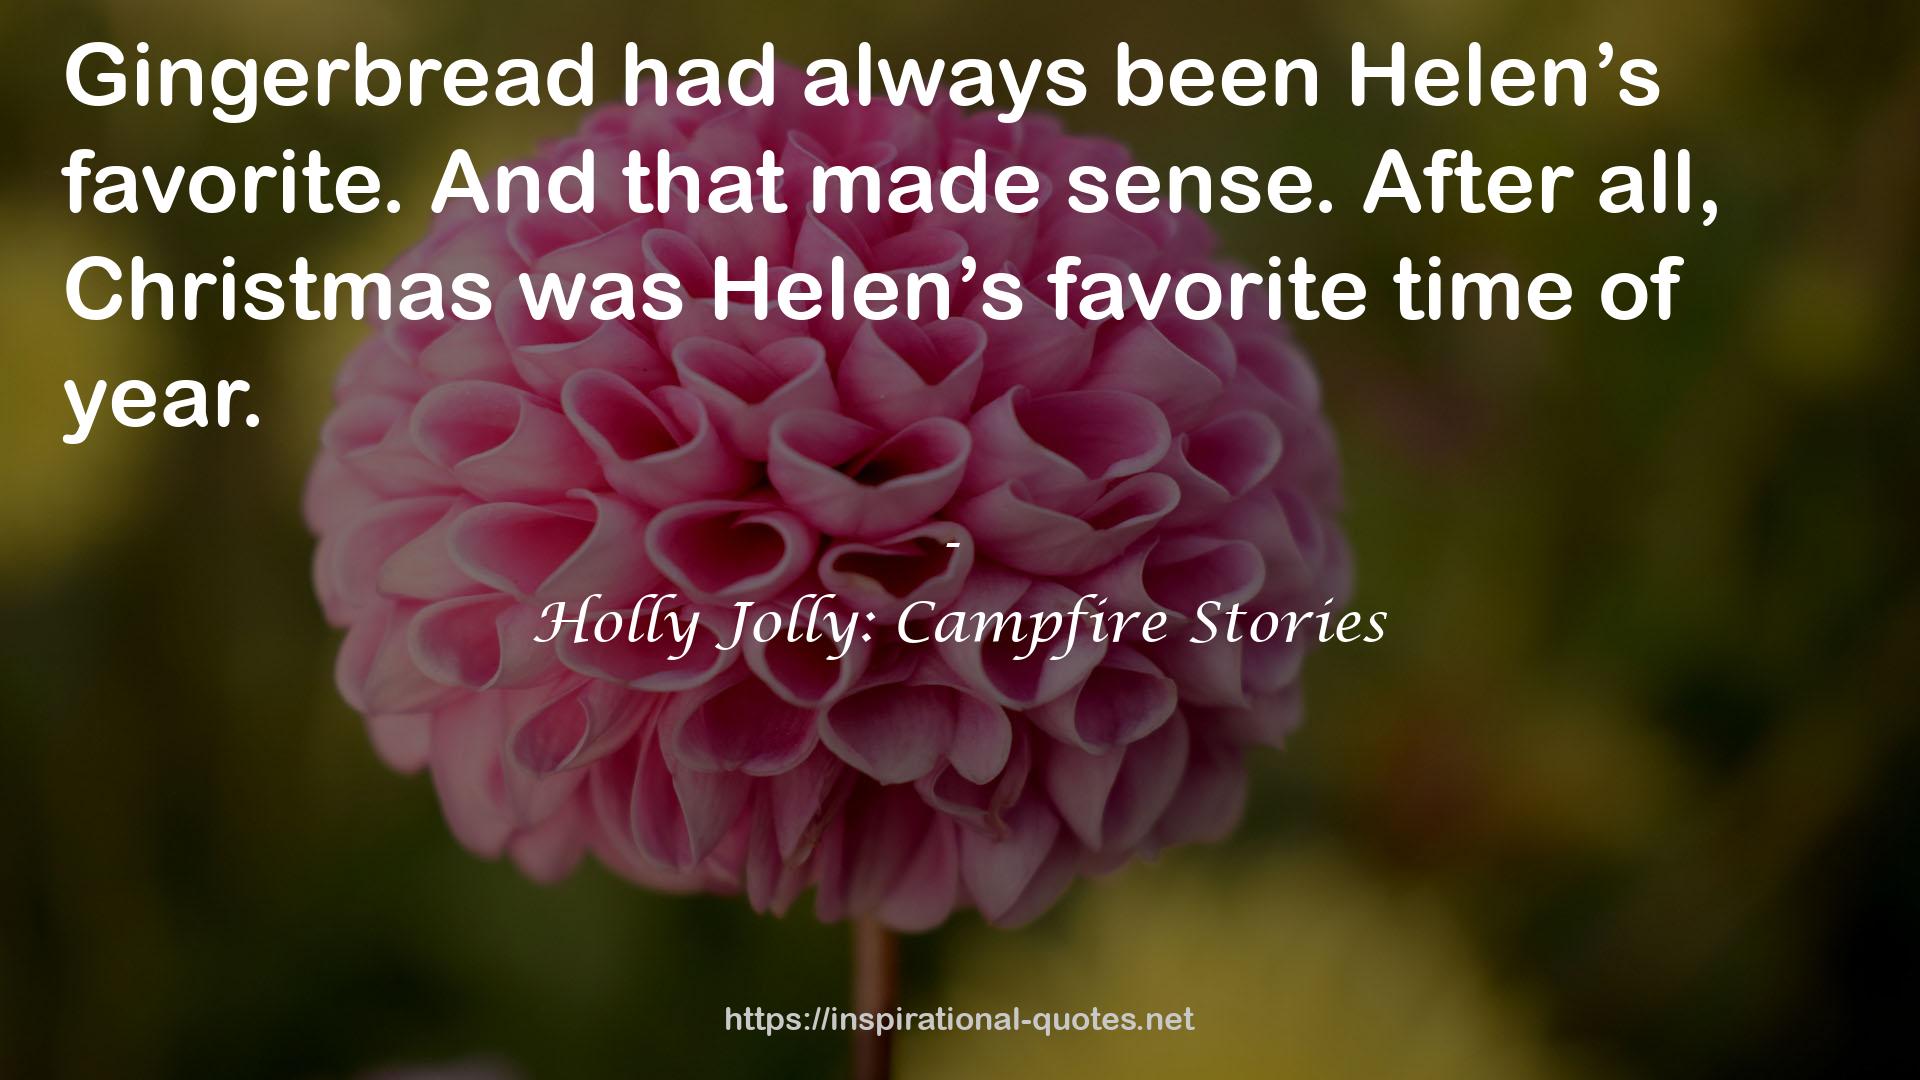 Holly Jolly: Campfire Stories QUOTES